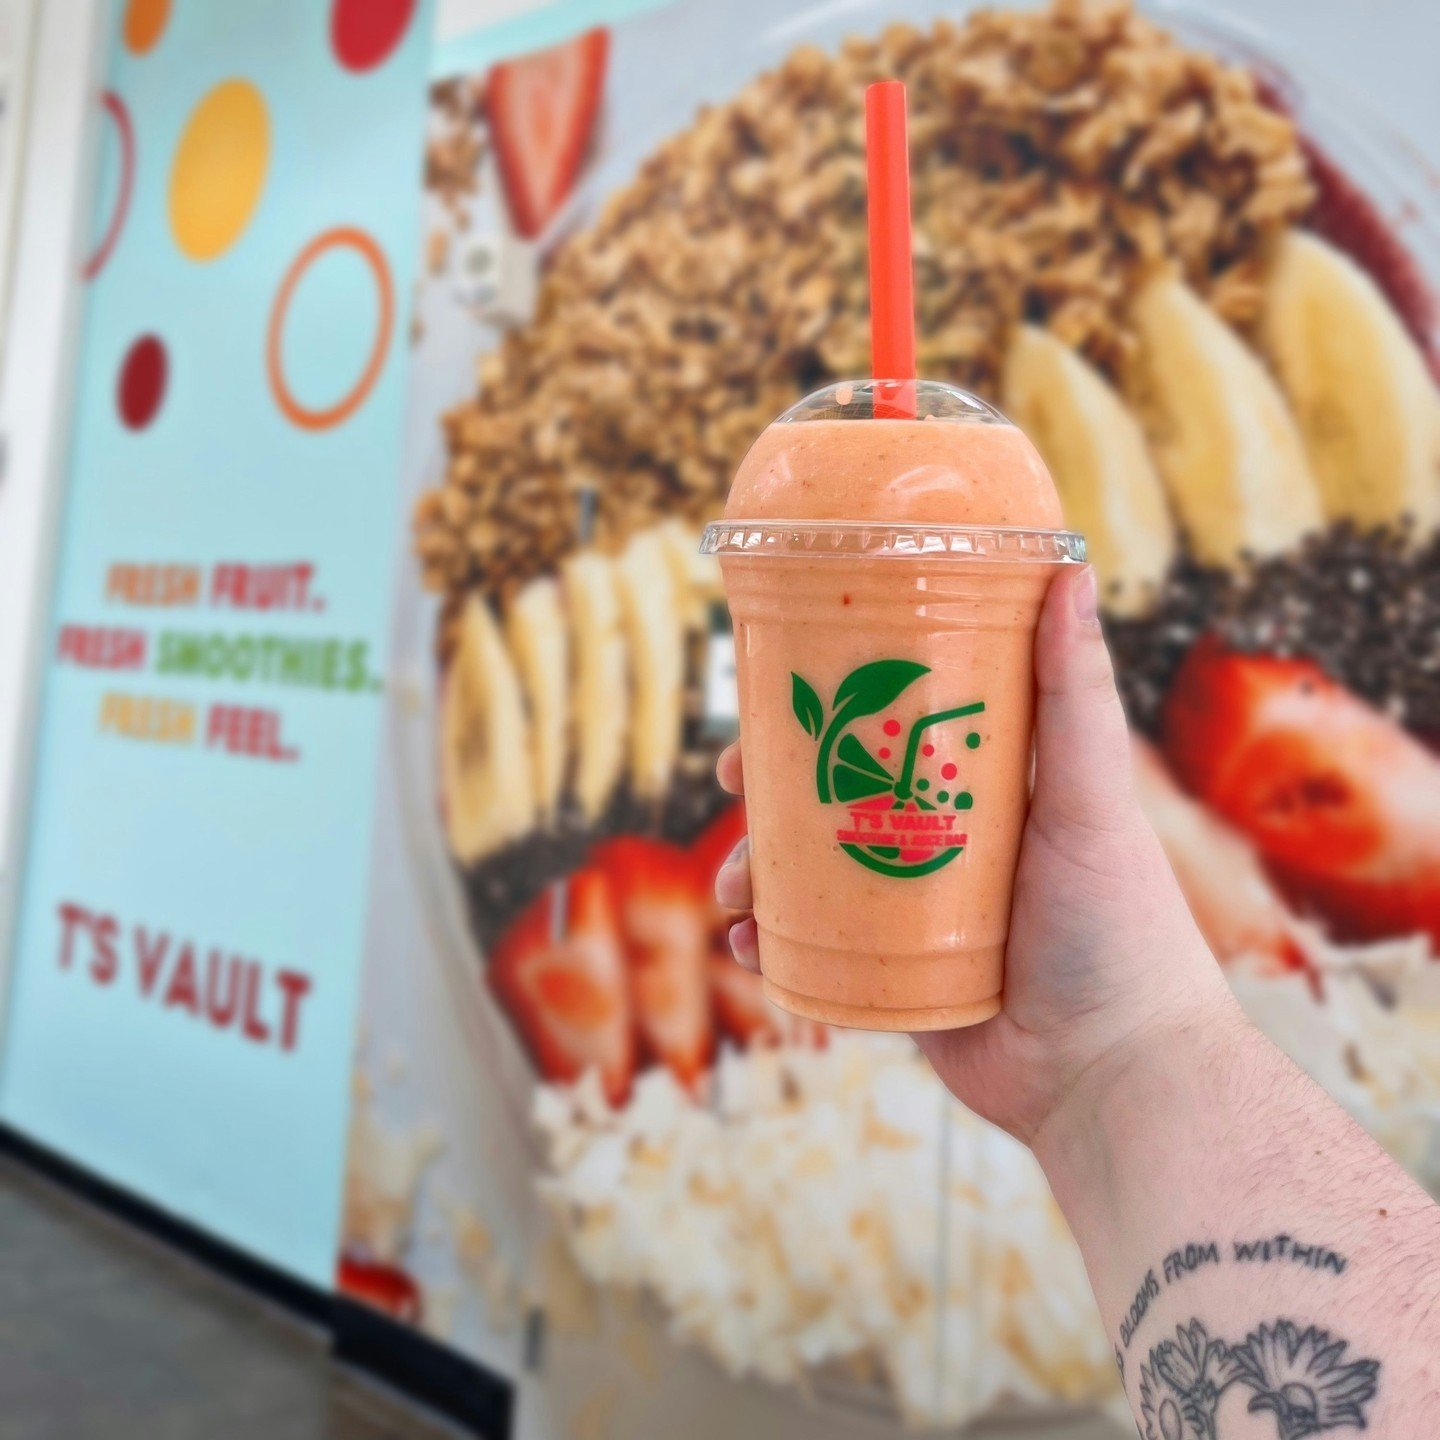 HAVE YOU HEARD? 🎉 🌈 

@tsvault_smoothiejuicebar is now open at Warwick Mall! 
Stop by the Carousel Food Court and try some amazingly fresh smoothies and juices, coffee, paninis and crepes, a&ccedil;a&iacute; bowls and so much more tasty goodness at